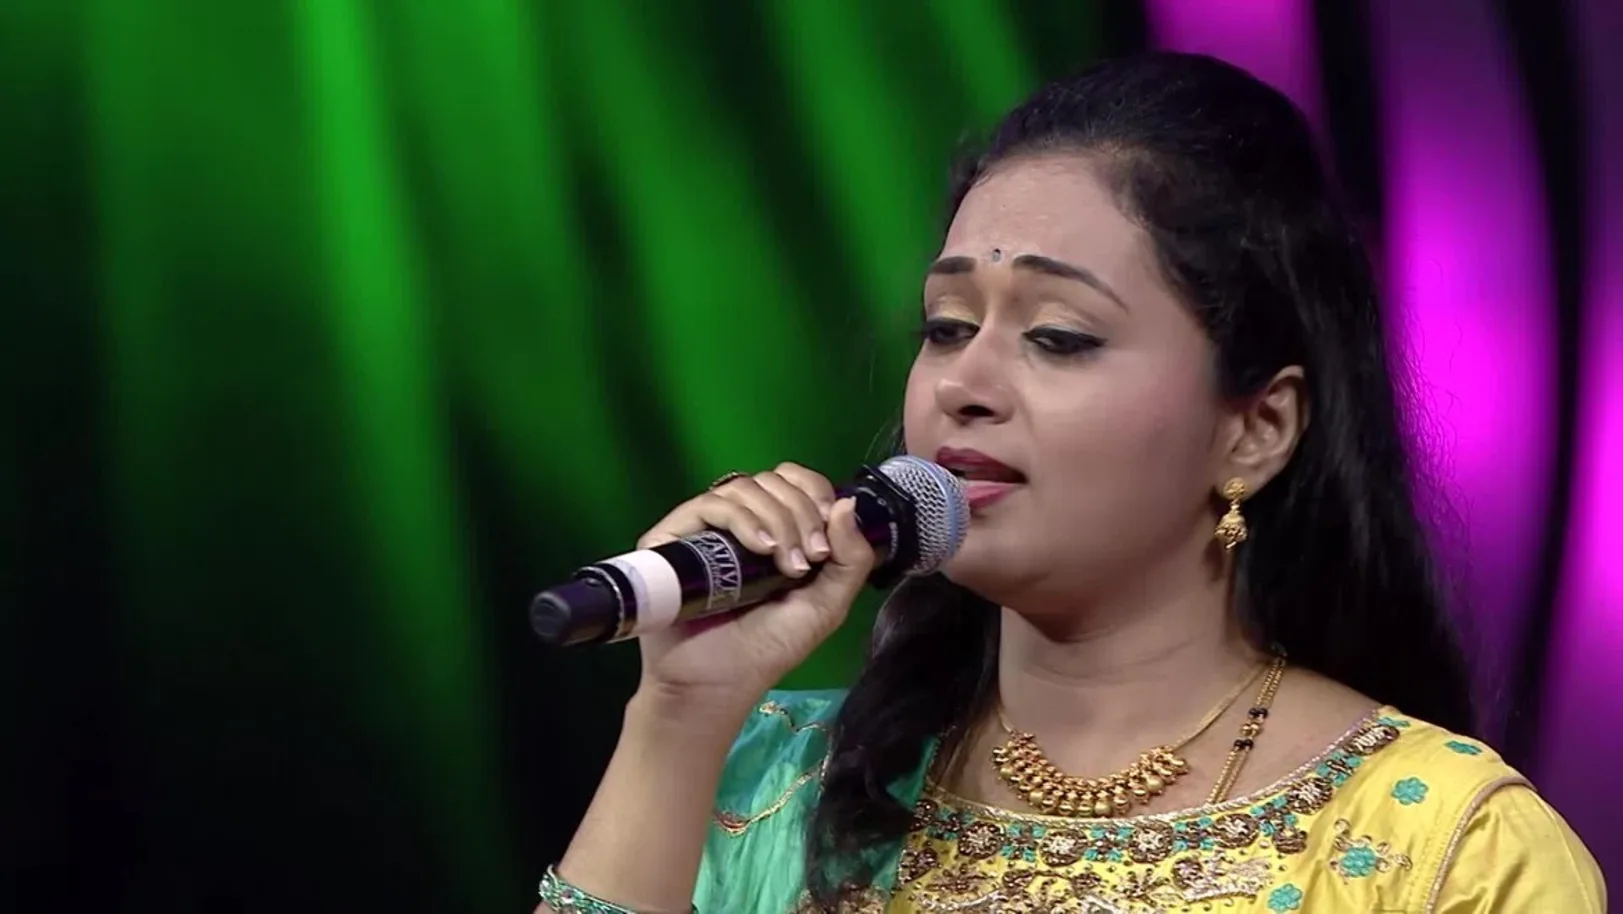 Sushma Anil nails it with a classical song! - 13th October 2018 - Sa Re Ga Ma Pa Season 15 13th October 2018 Webisode